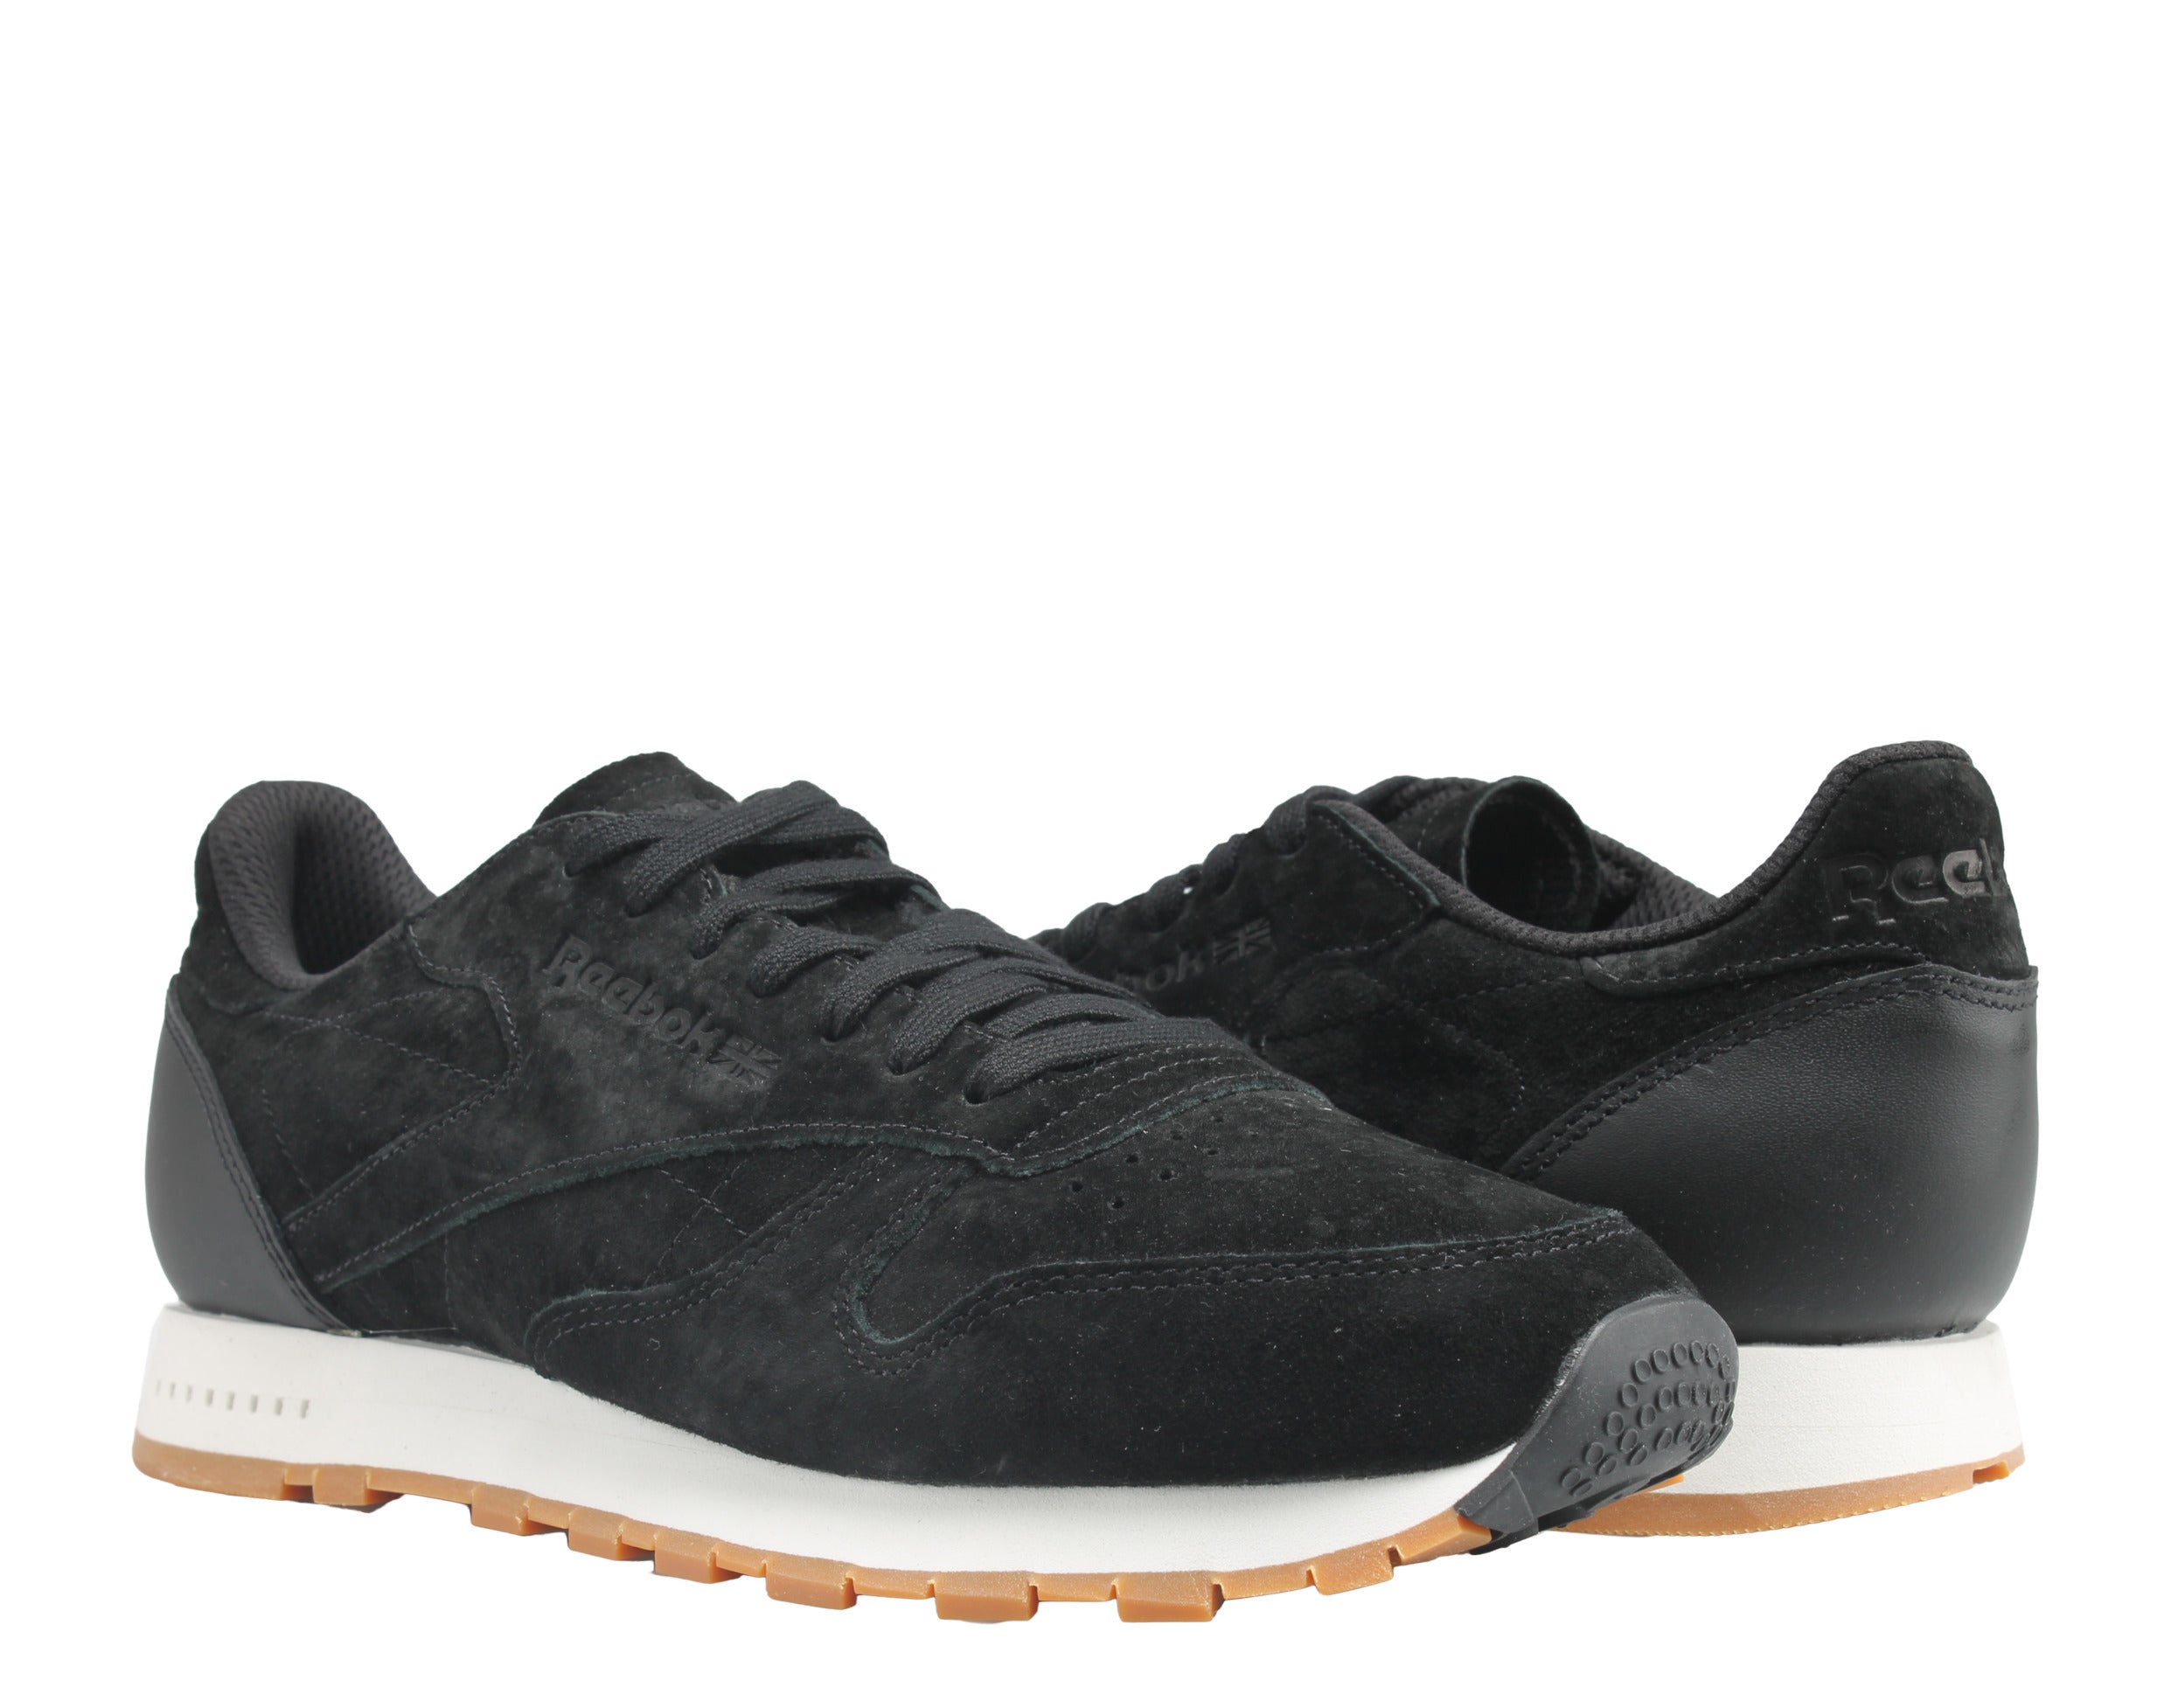 Reebok Classic Leather SG Men's Running Shoes –